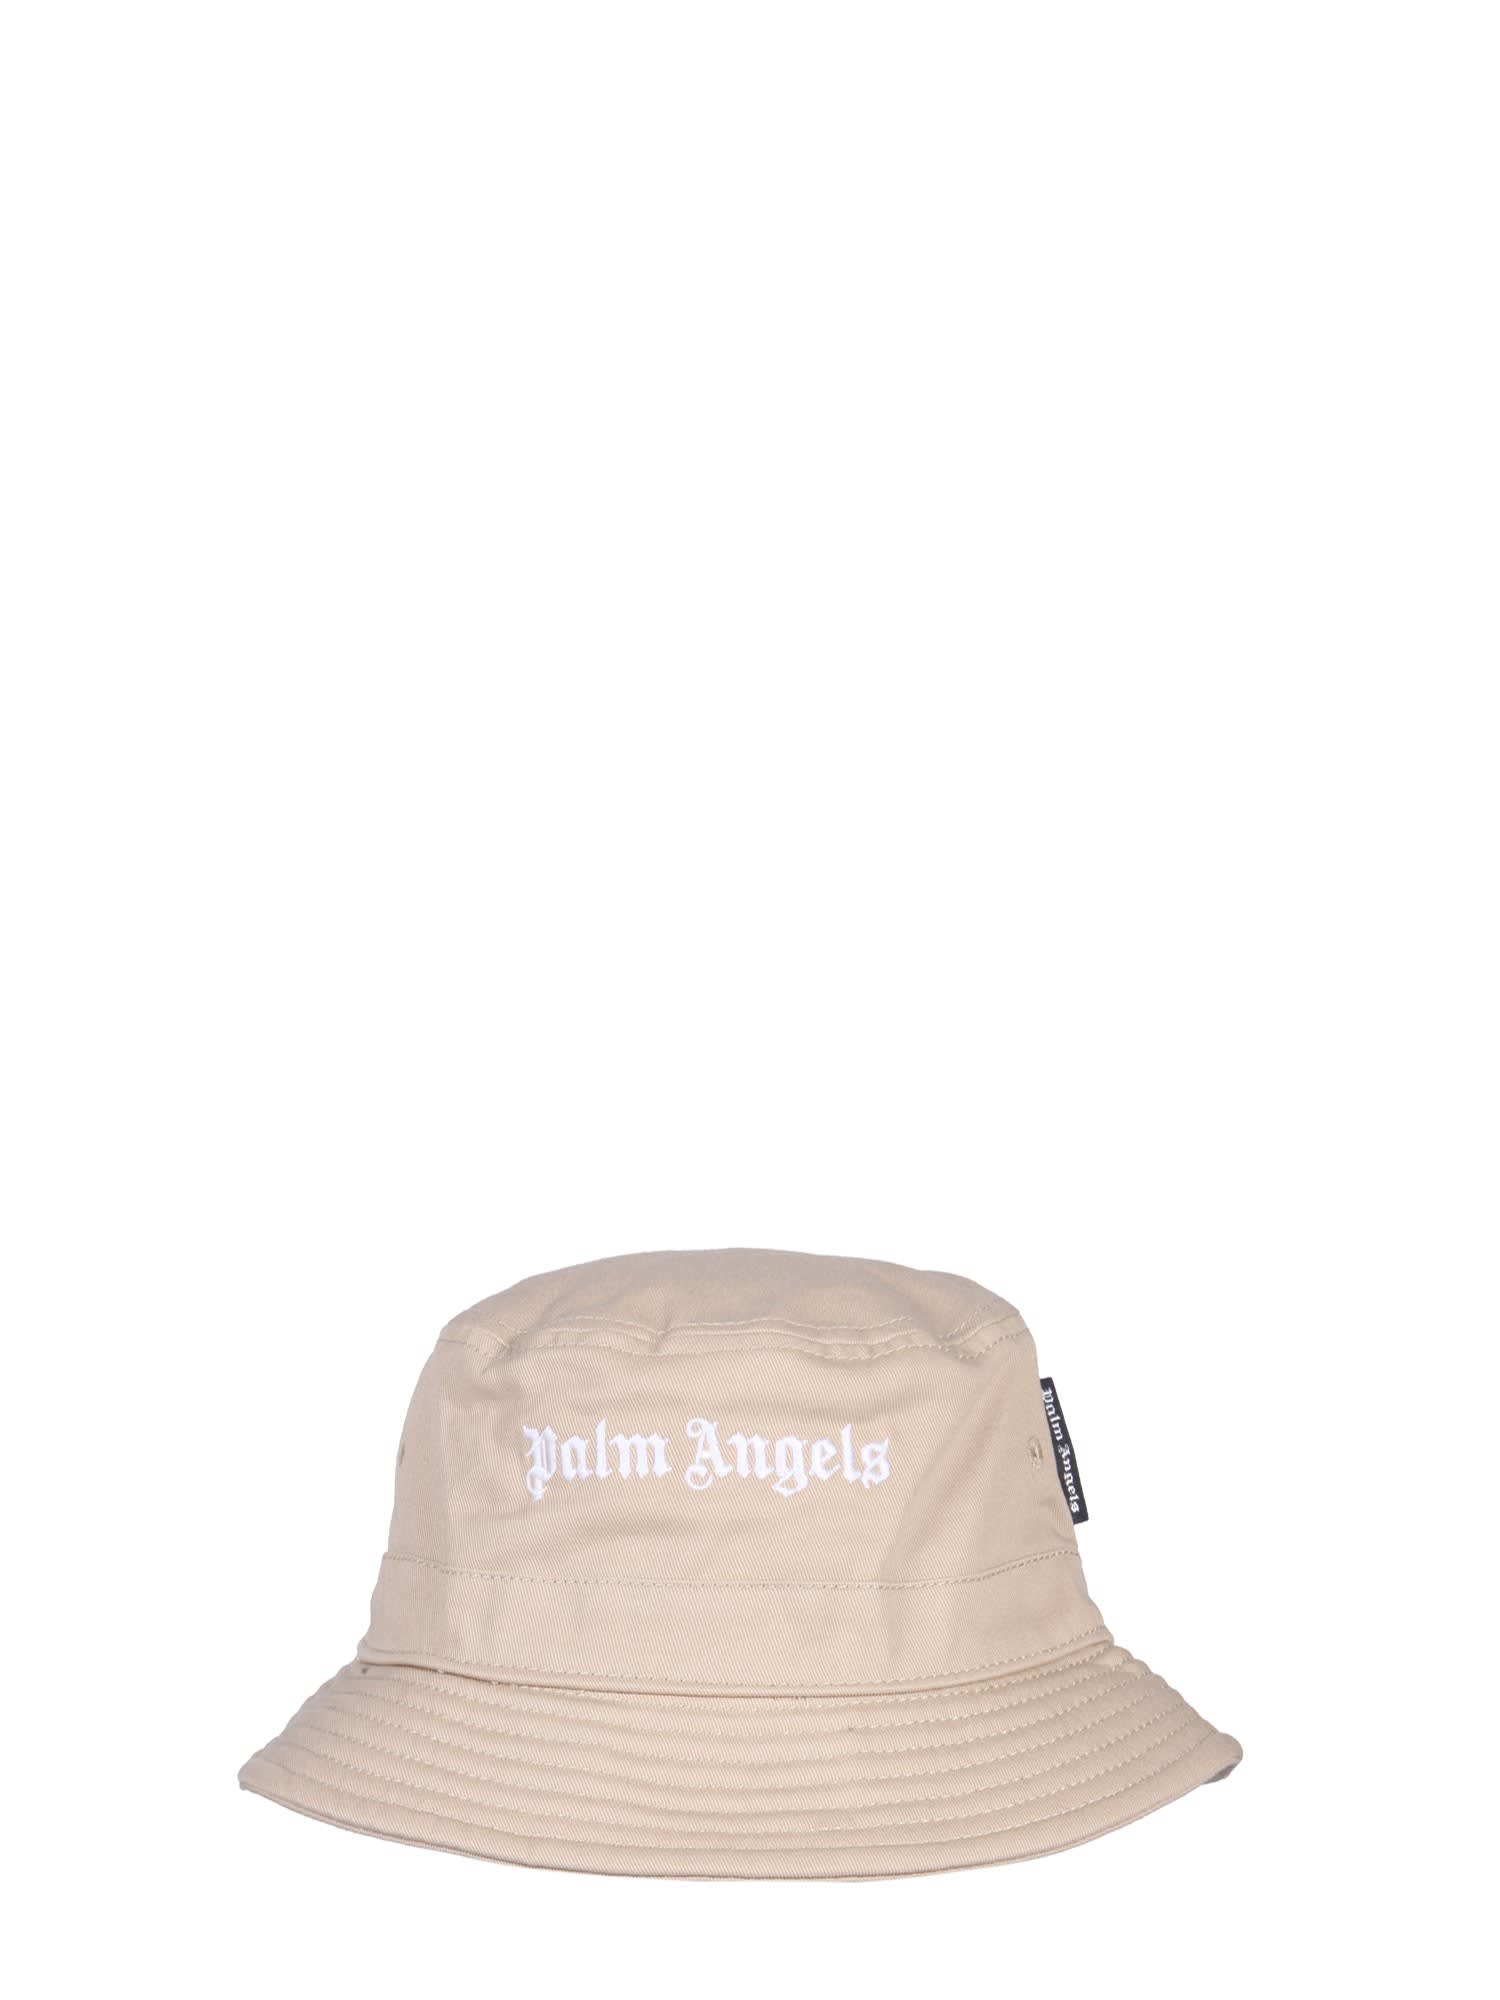 Palm Angels Embroidered Logo Bucke Hat